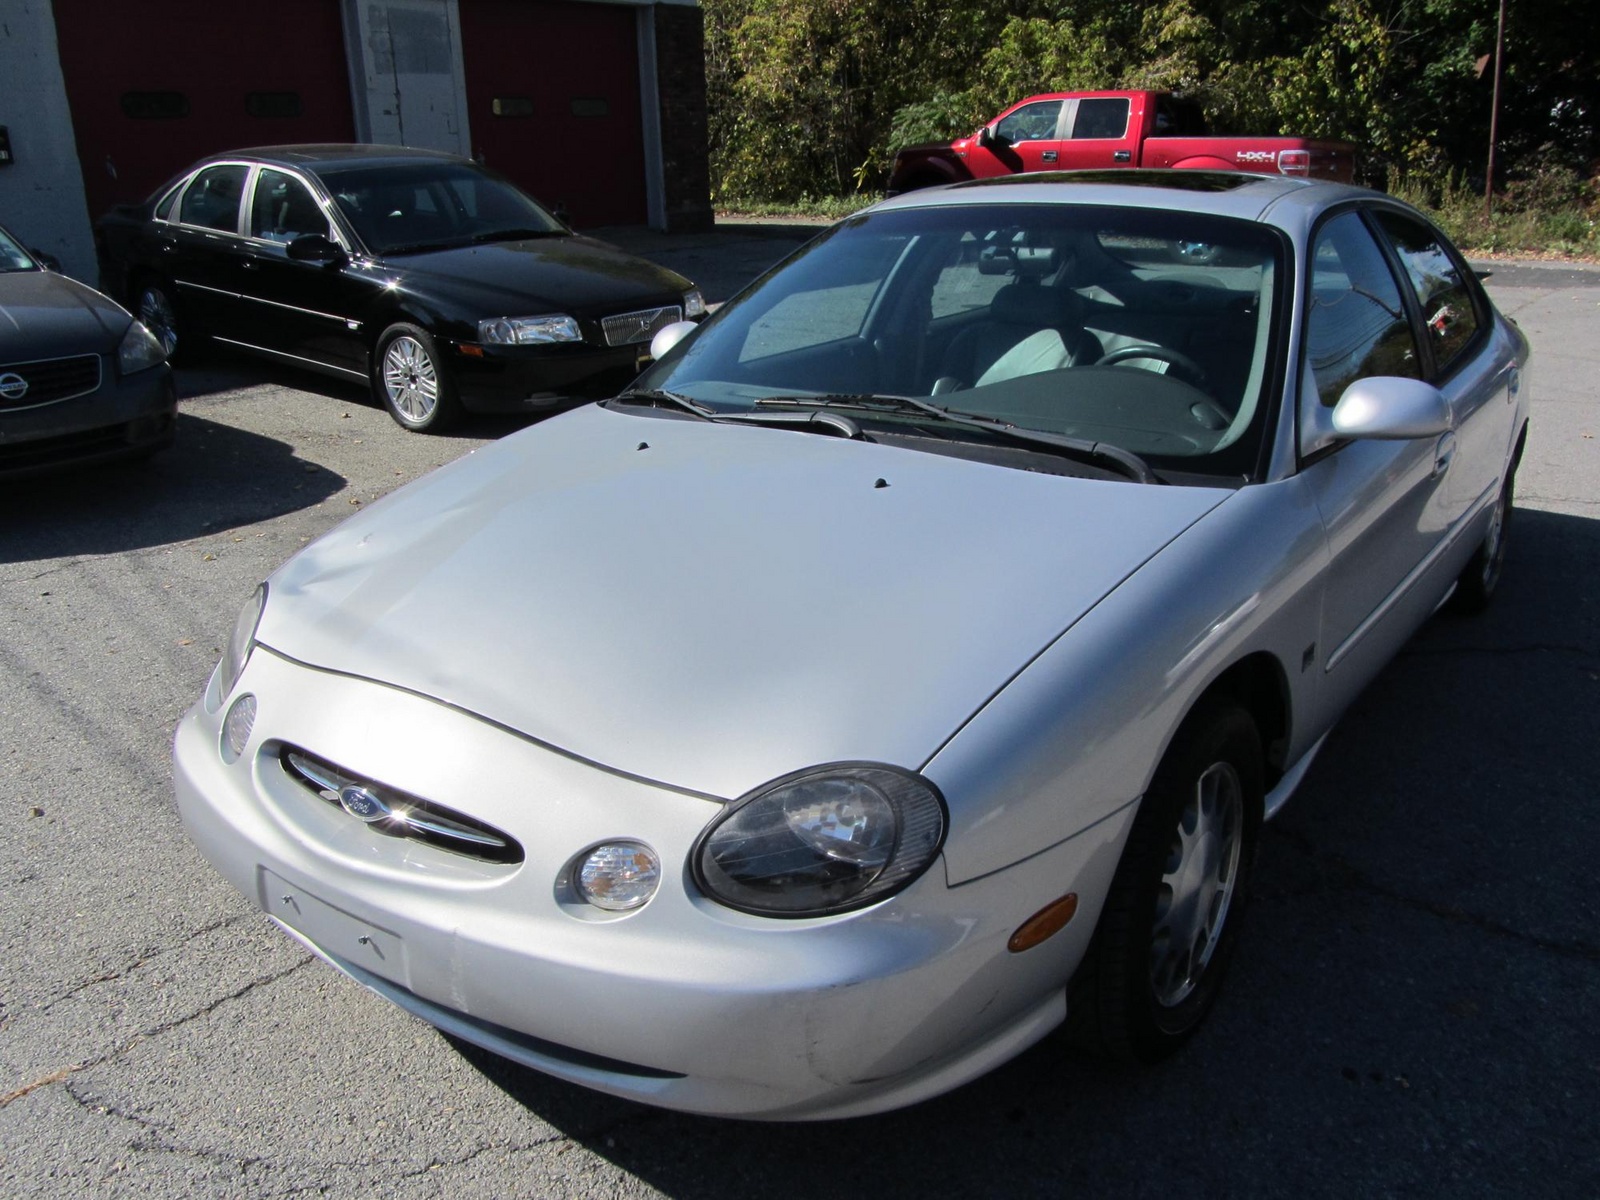 1999 Ford taurus wagon specifications #3